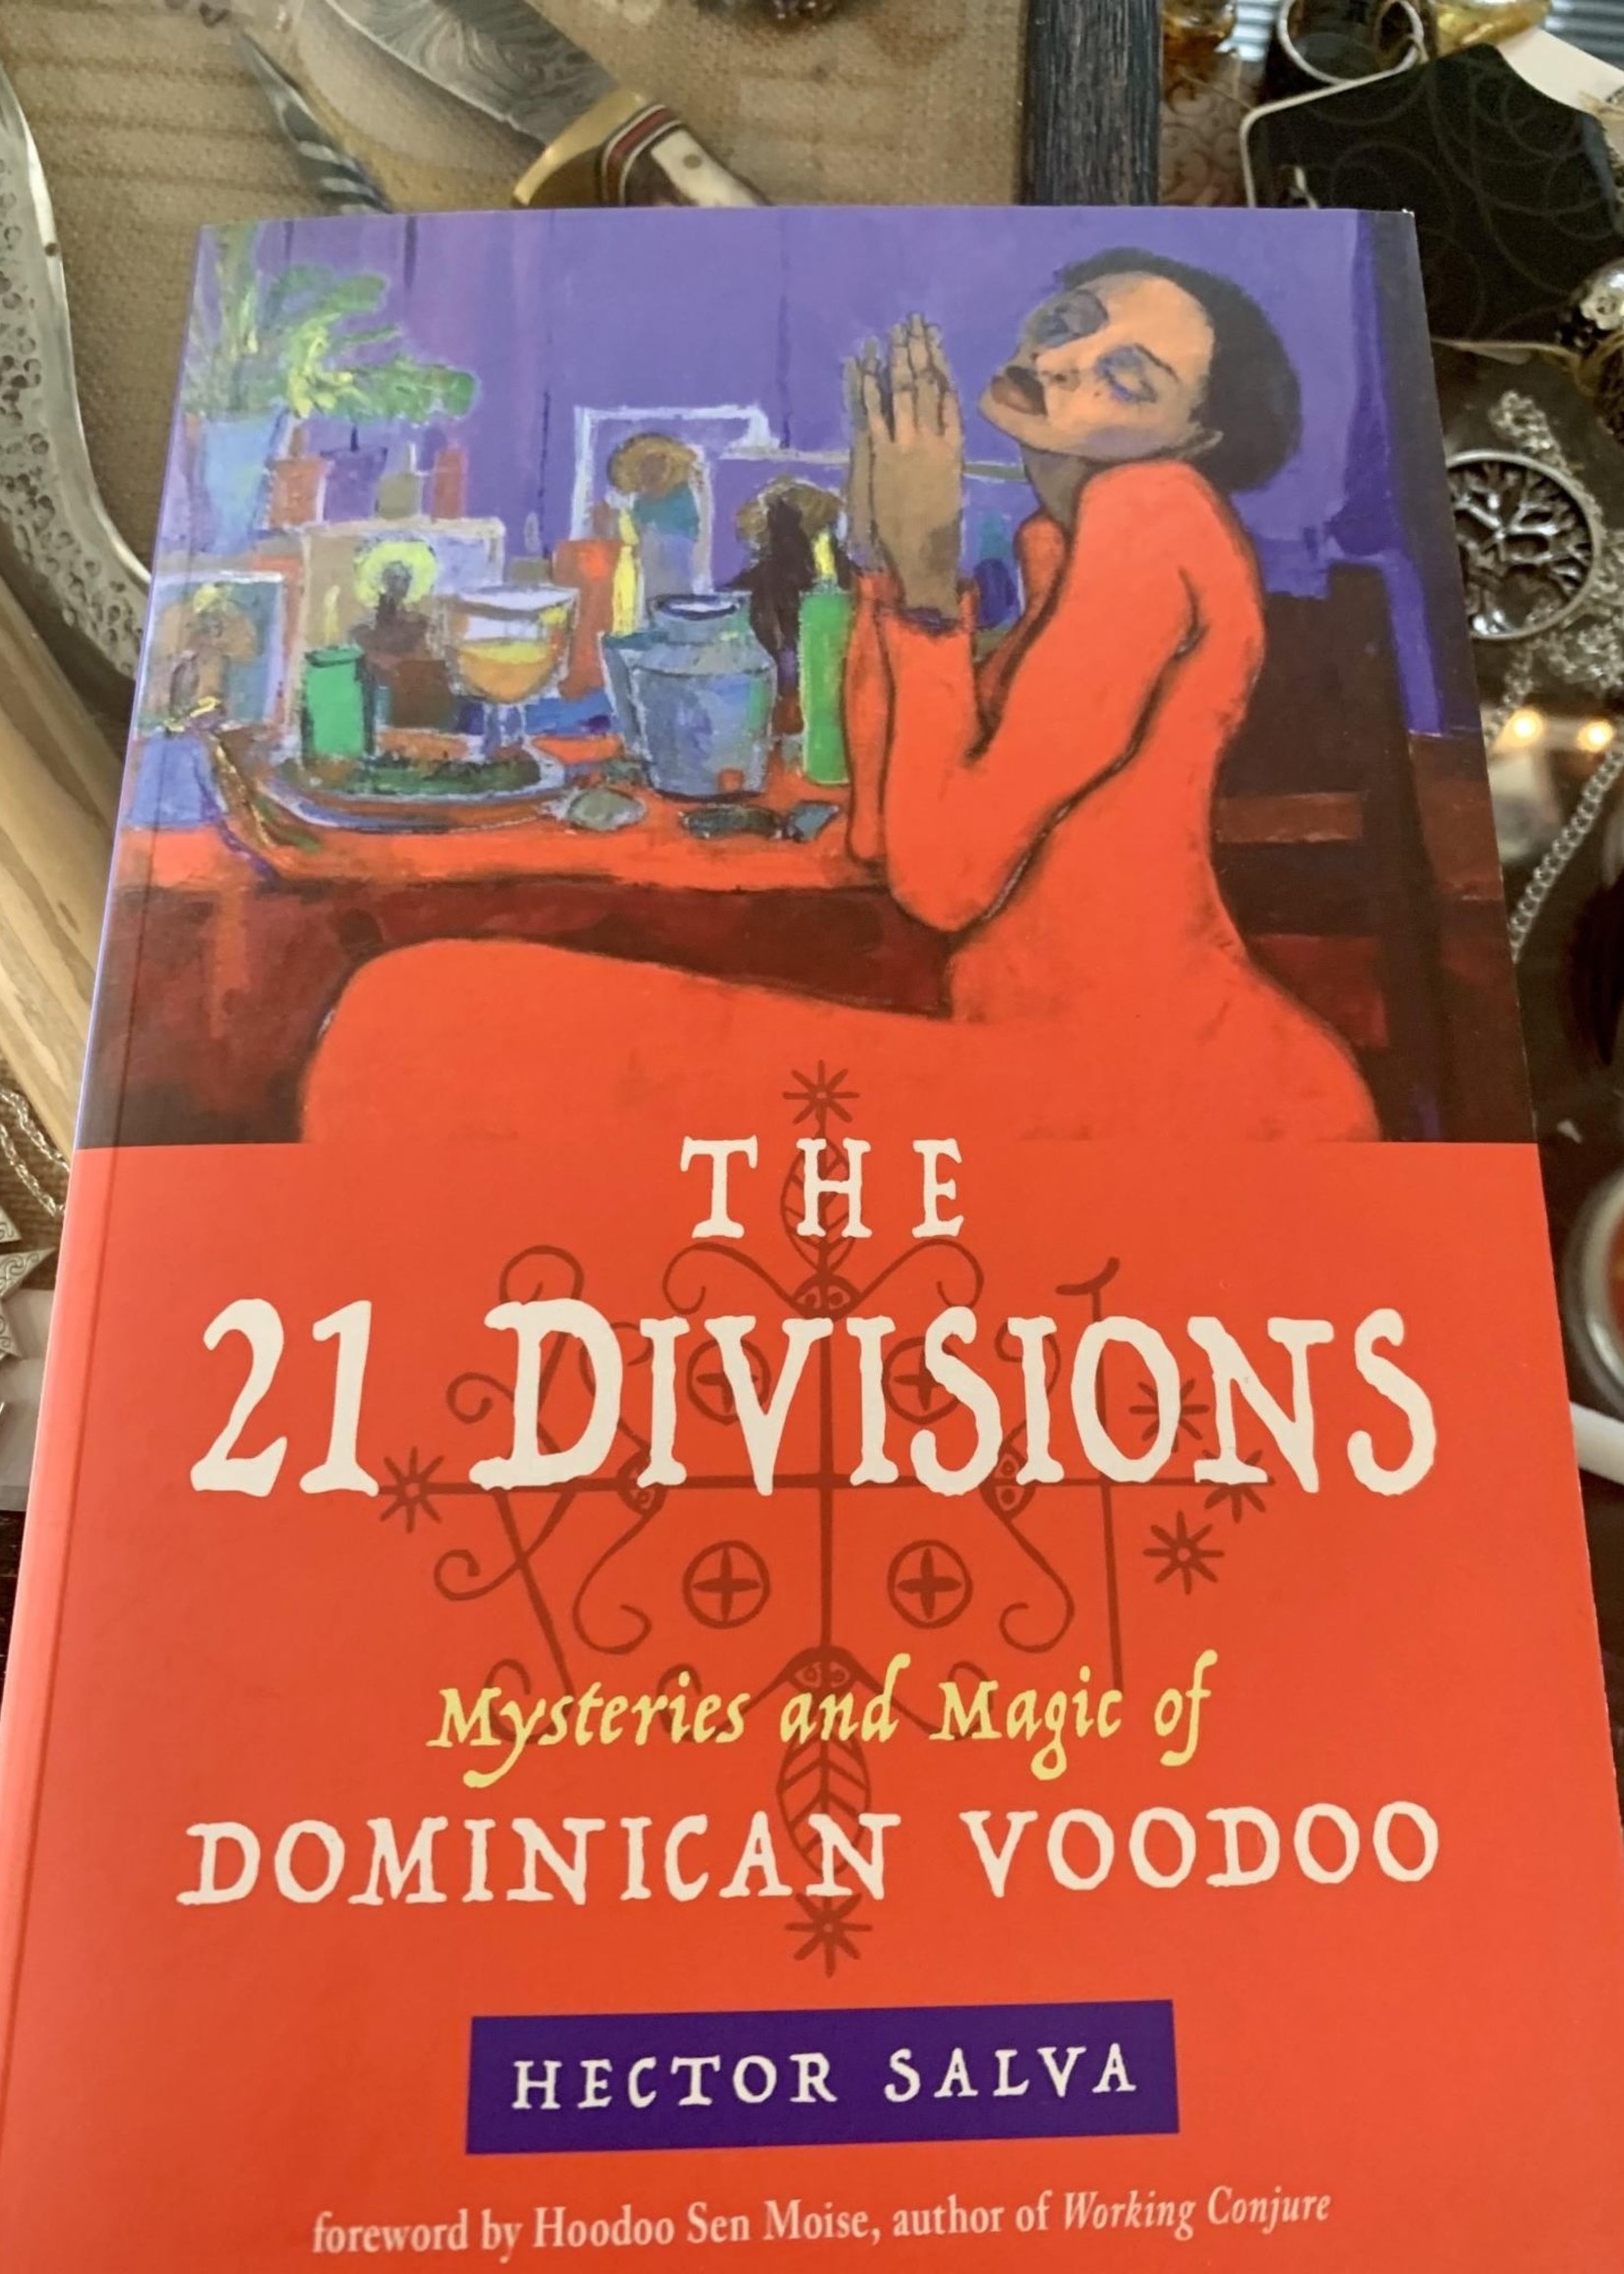 The 21 Divisions Mysteries and Magic of Dominican Voodoo -  Hector Salva, Foreword Hoodoo Sen Moise